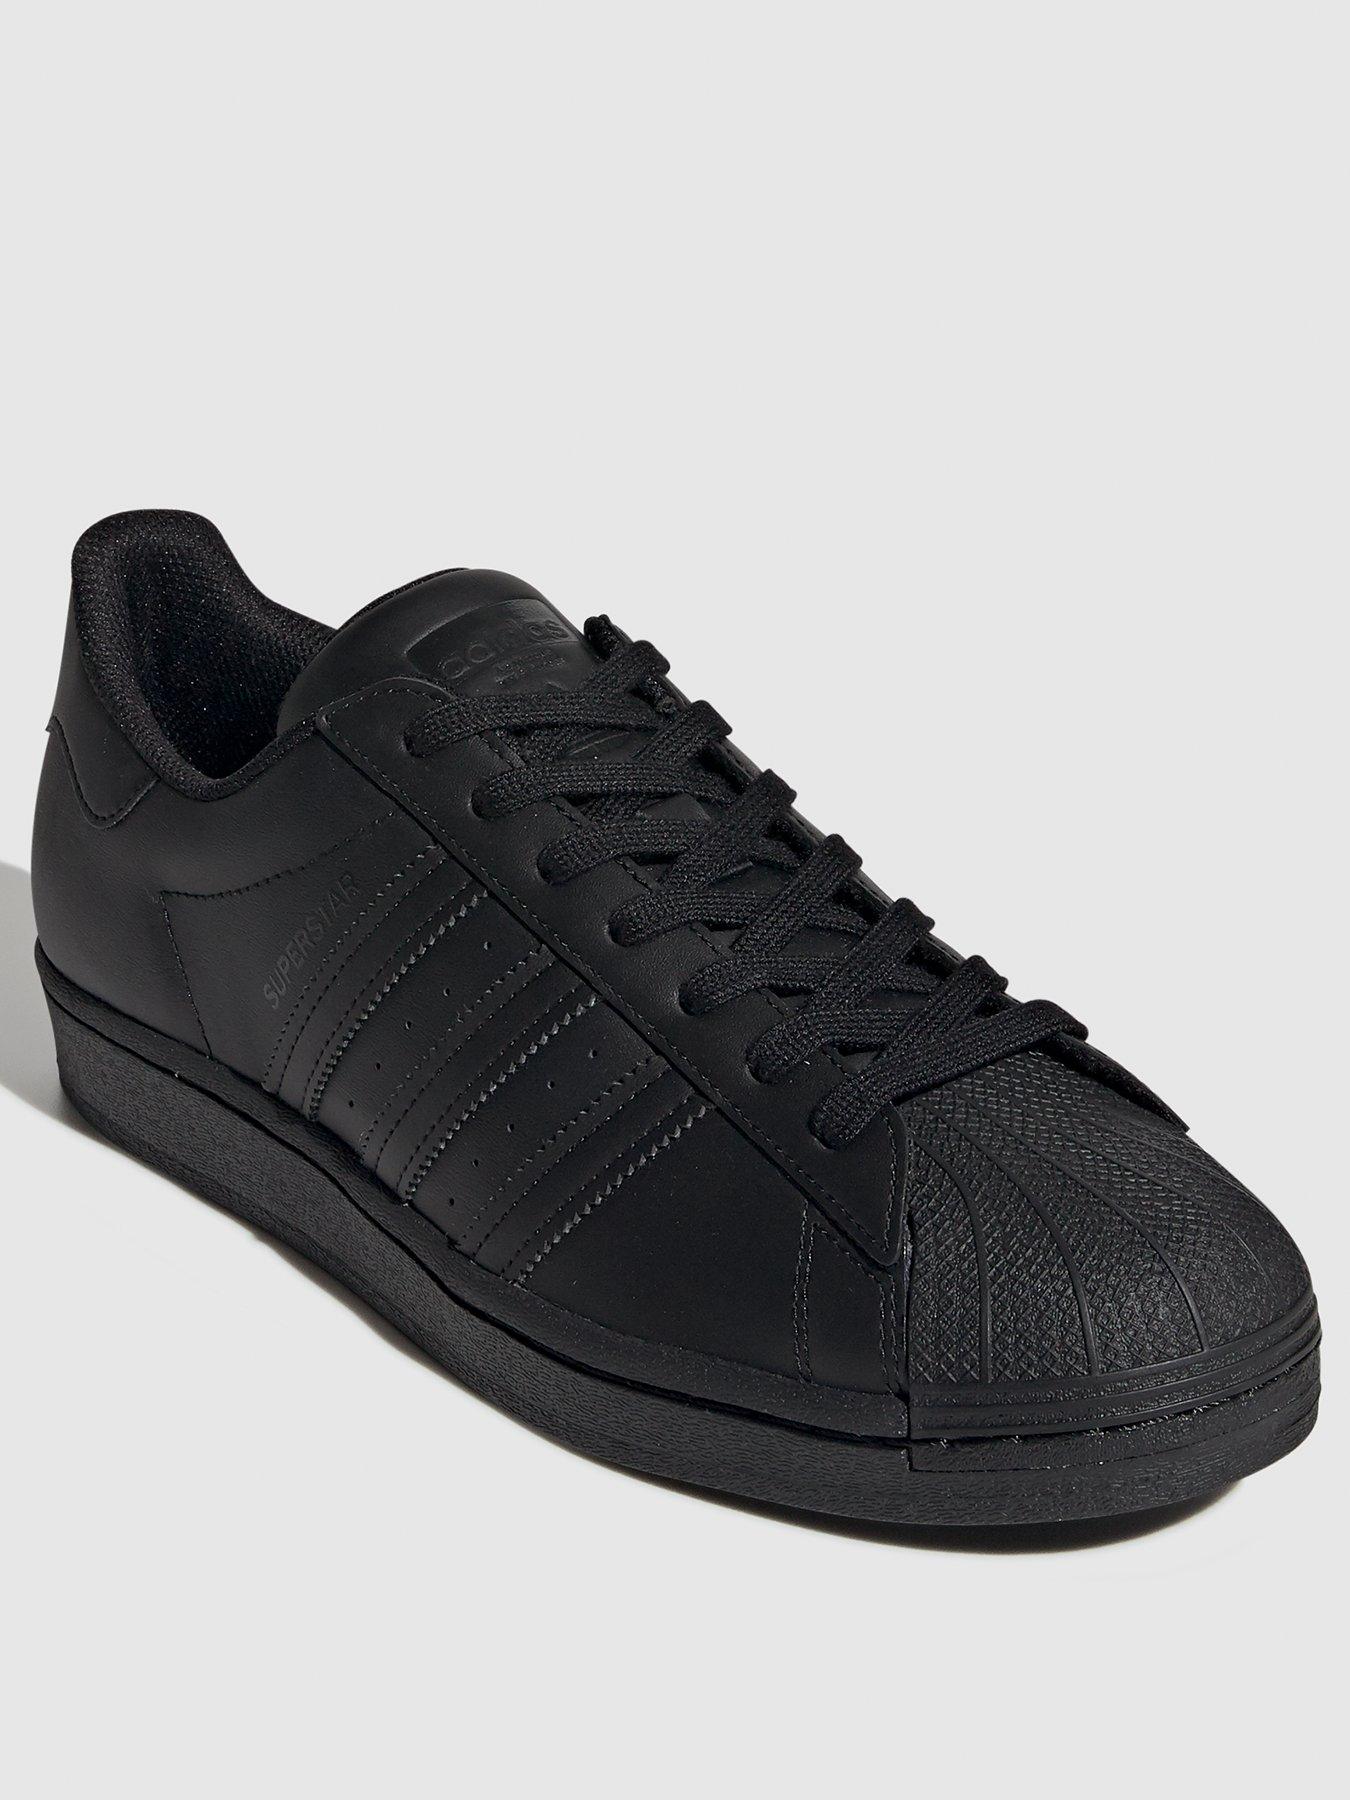 black leather adidas trainers womens